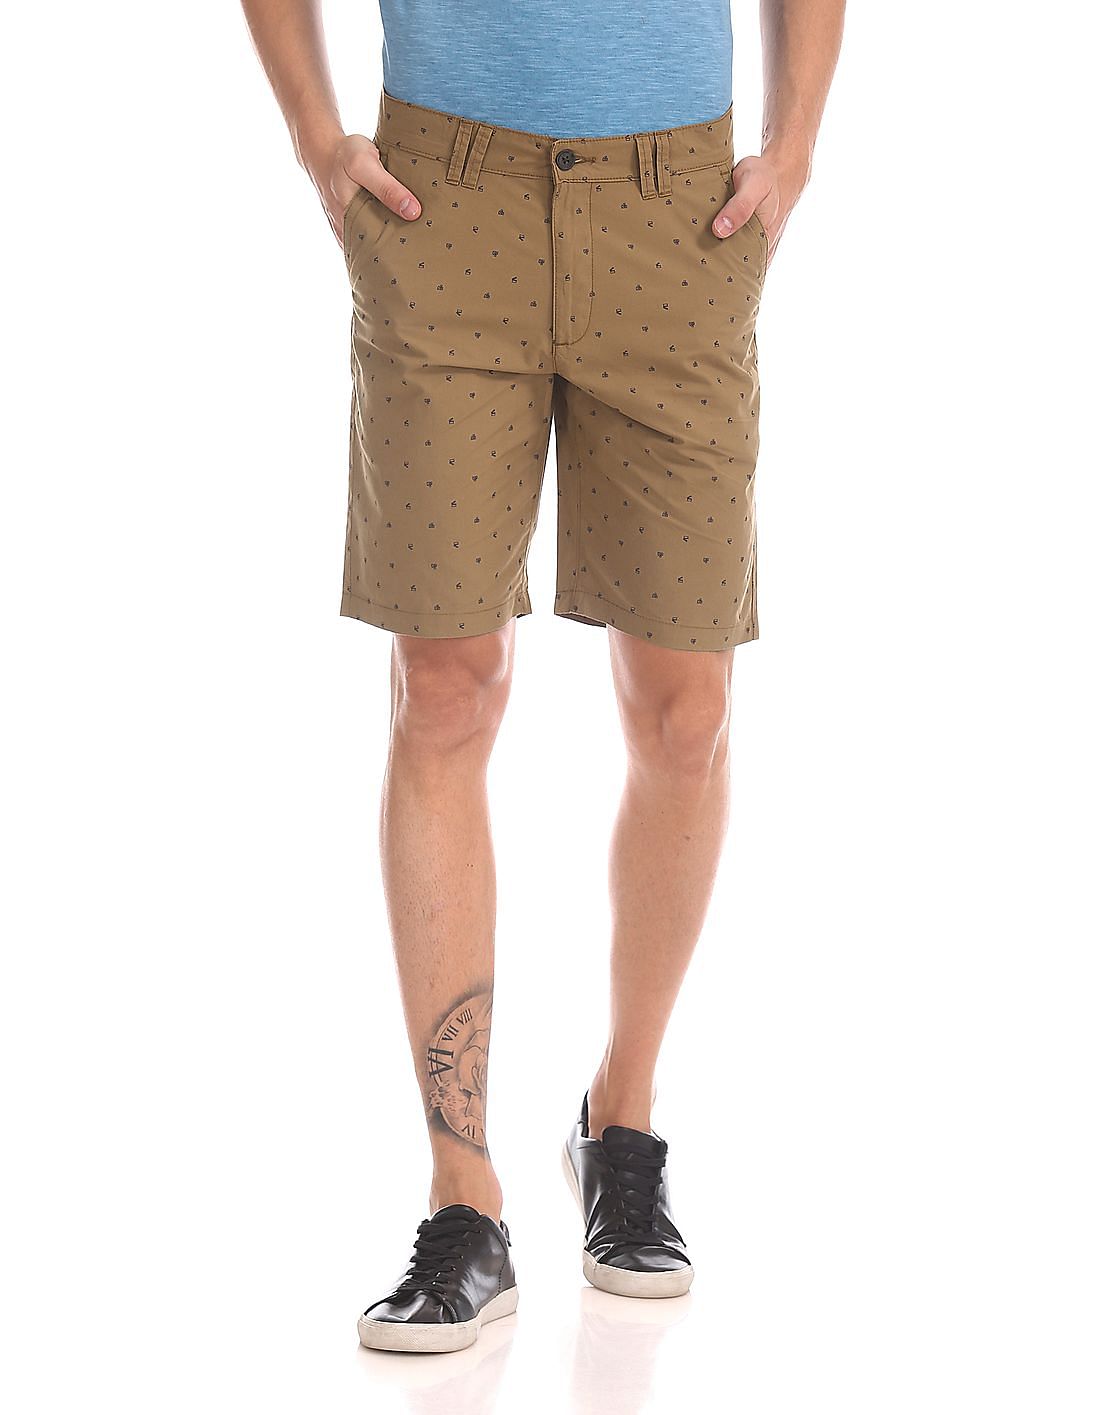 Buy Colt Printed Woven Shorts - NNNOW.com